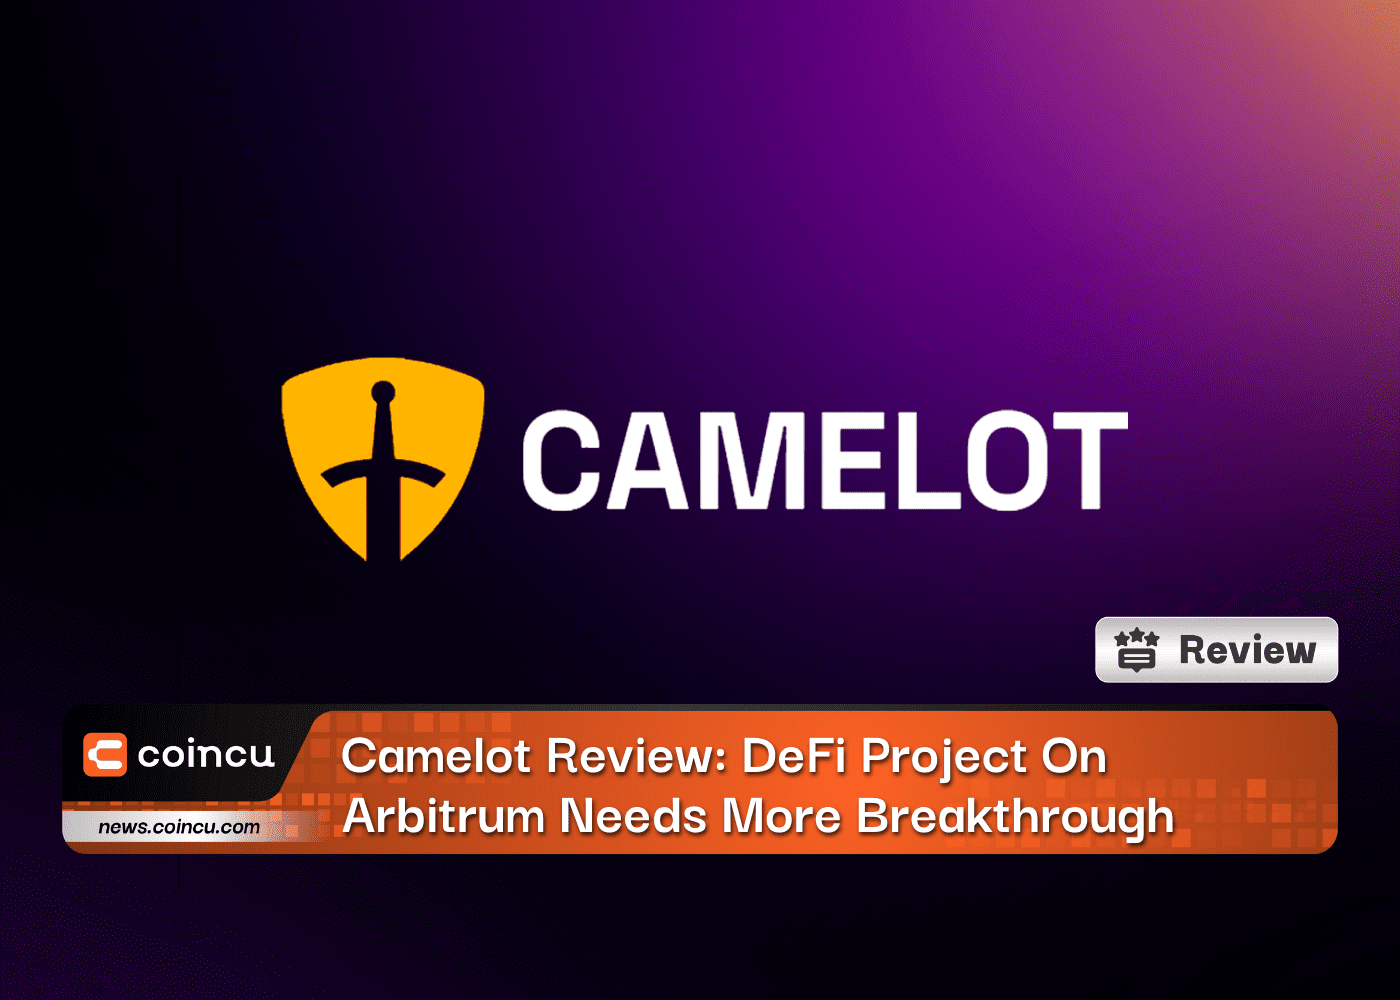 Camelot Review: DeFi Project On Arbitrum Needs More Breakthrough